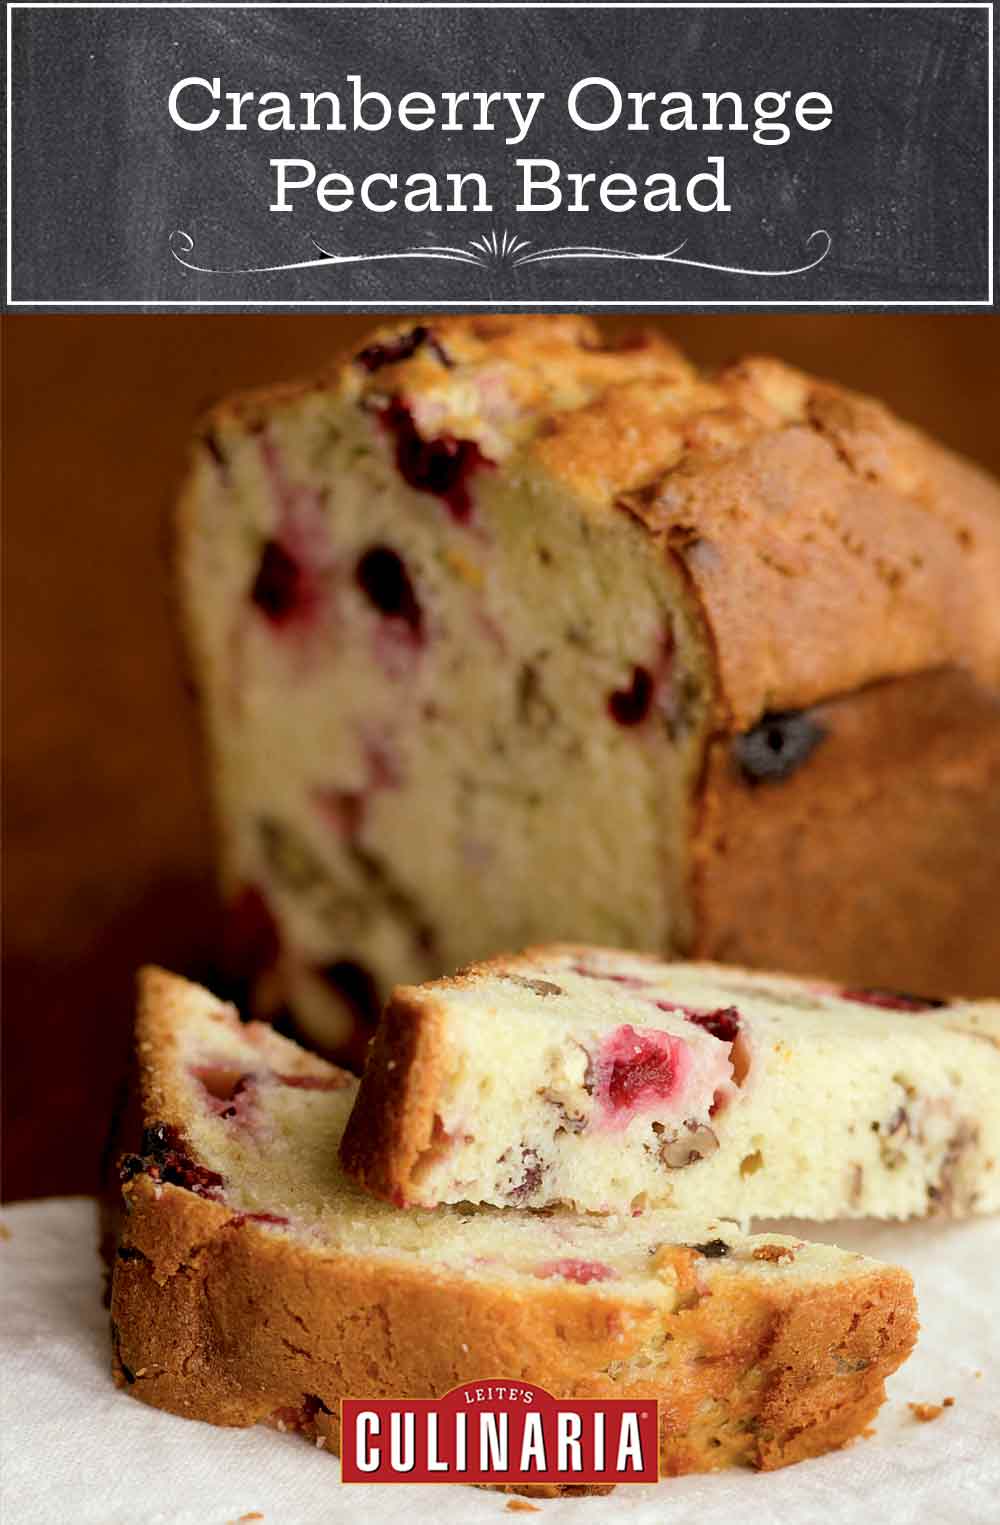 A loaf of cranberry orange pecan bread in the background with a halved slice from it in front